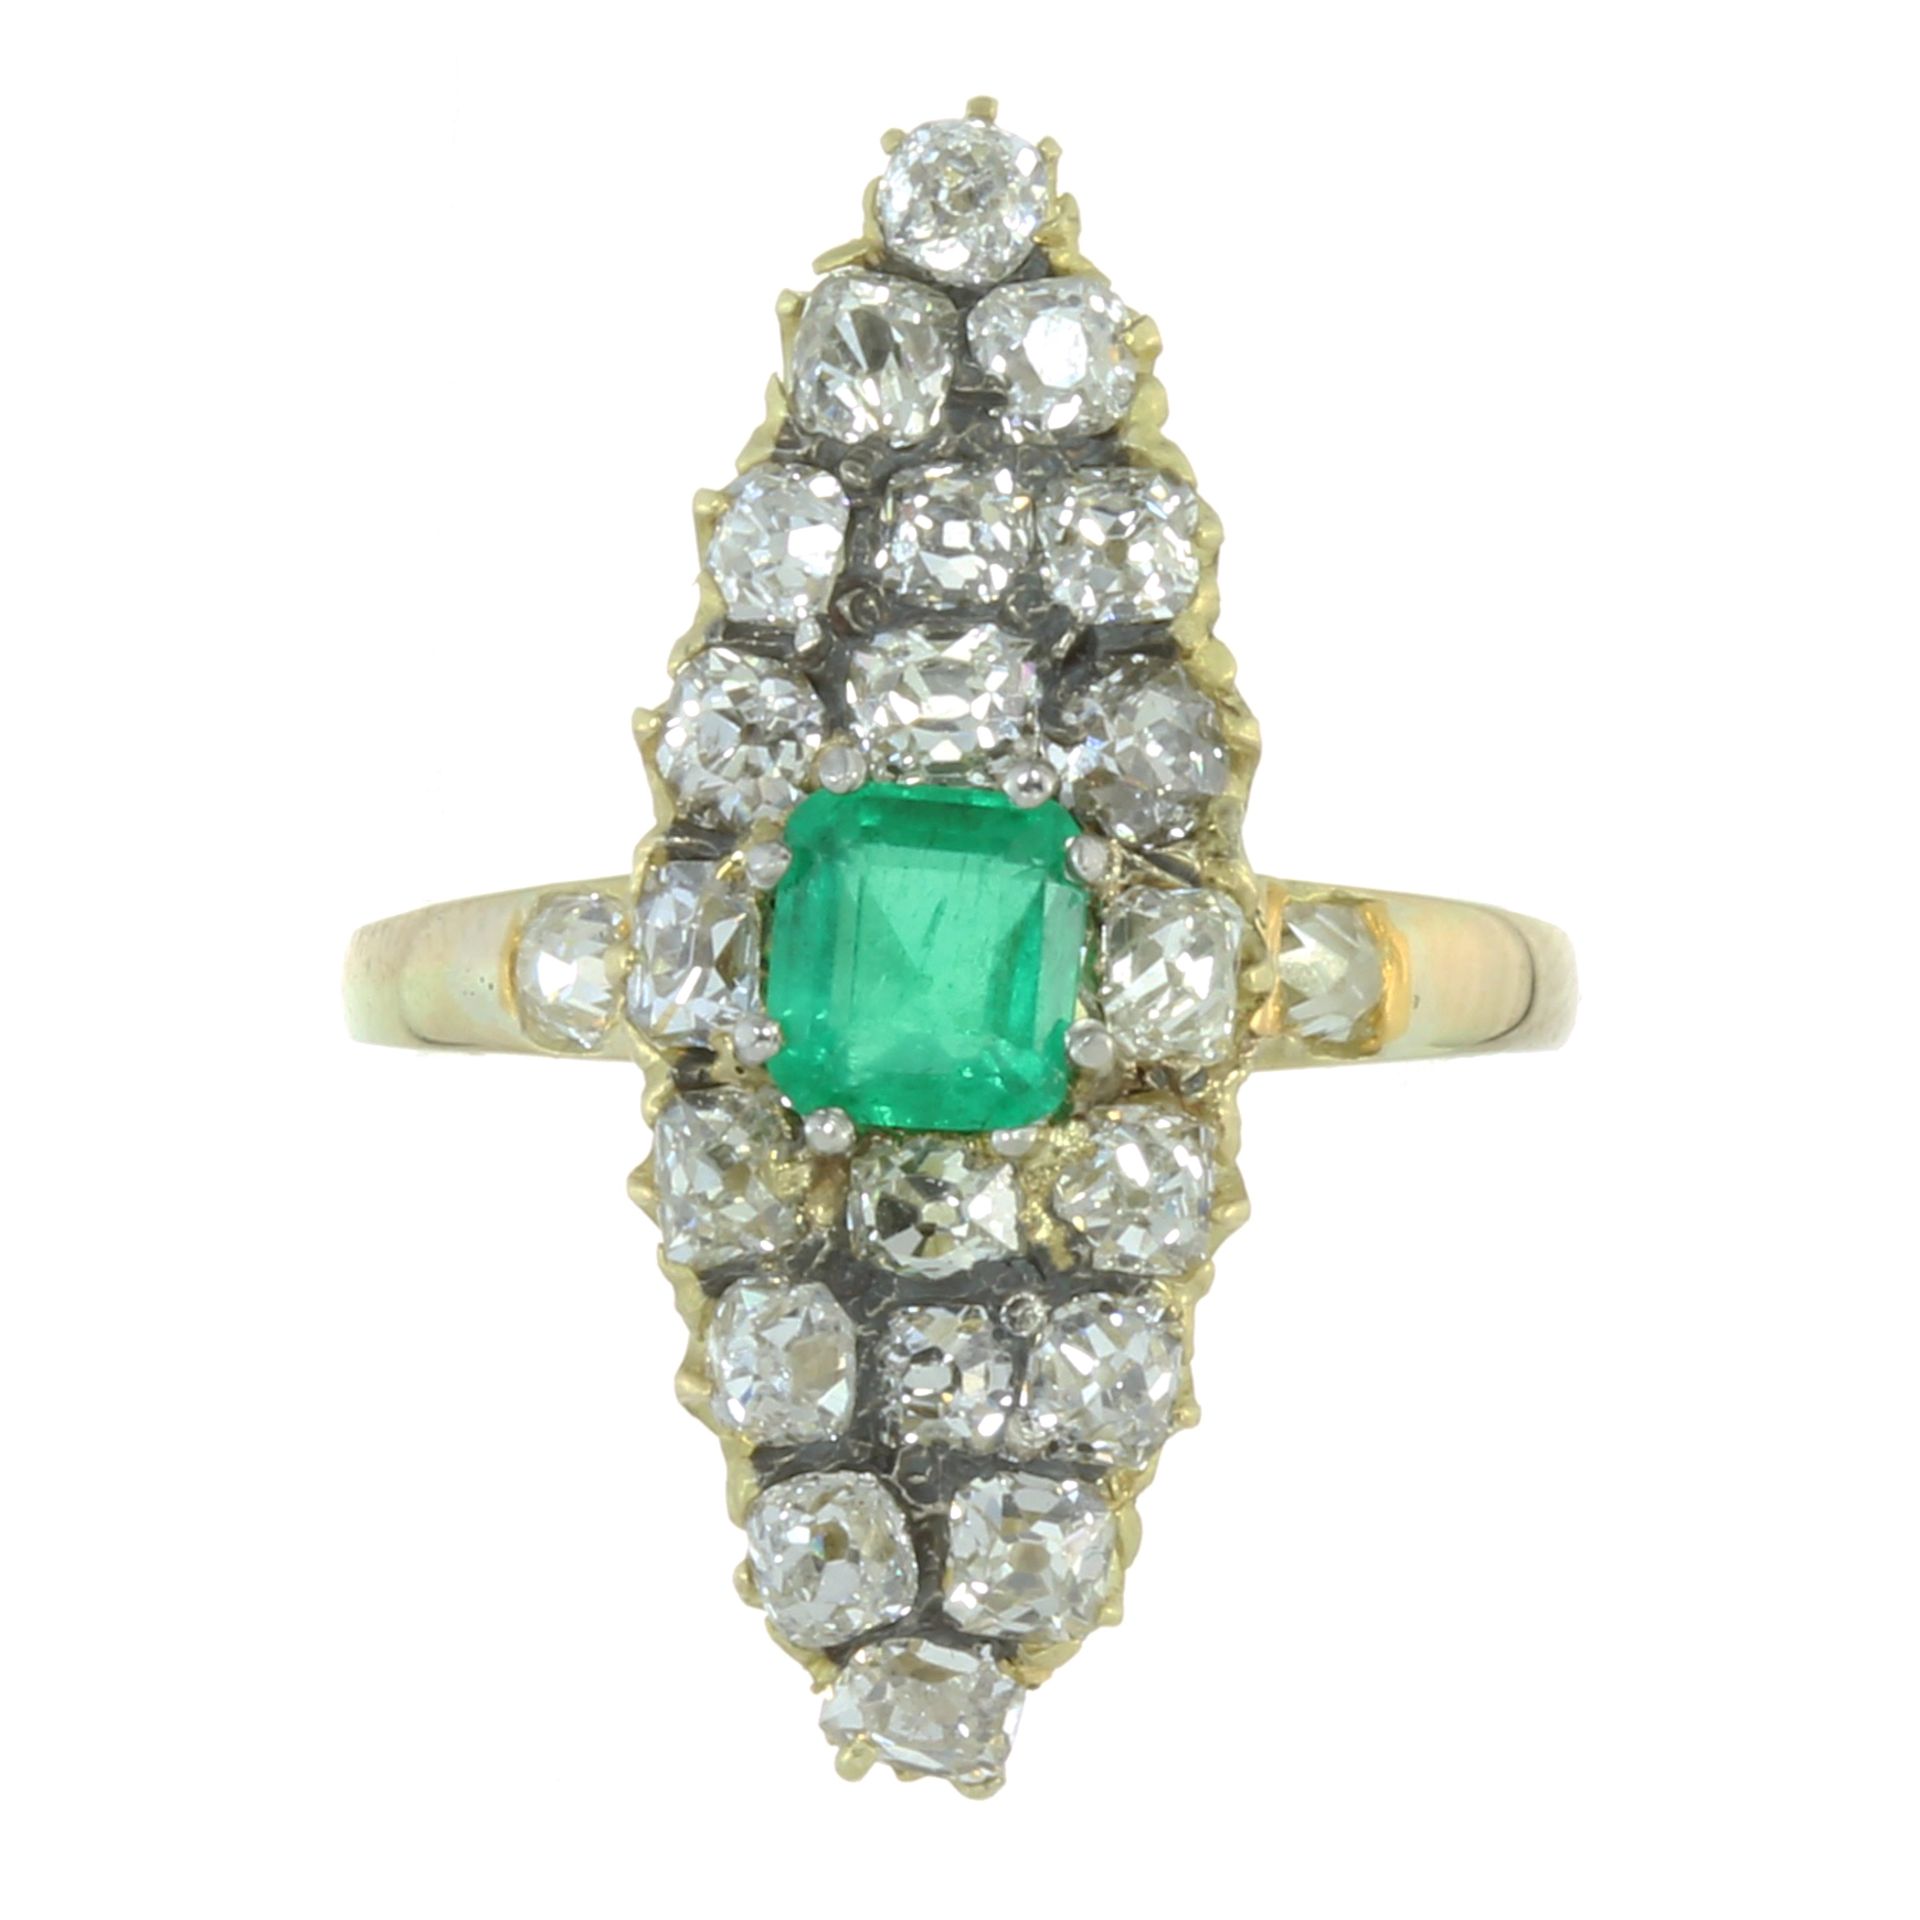 AN ANTIQUE EMERALD AND DIAMOND DRESS RING in high carat yellow gold, set with a central step cut